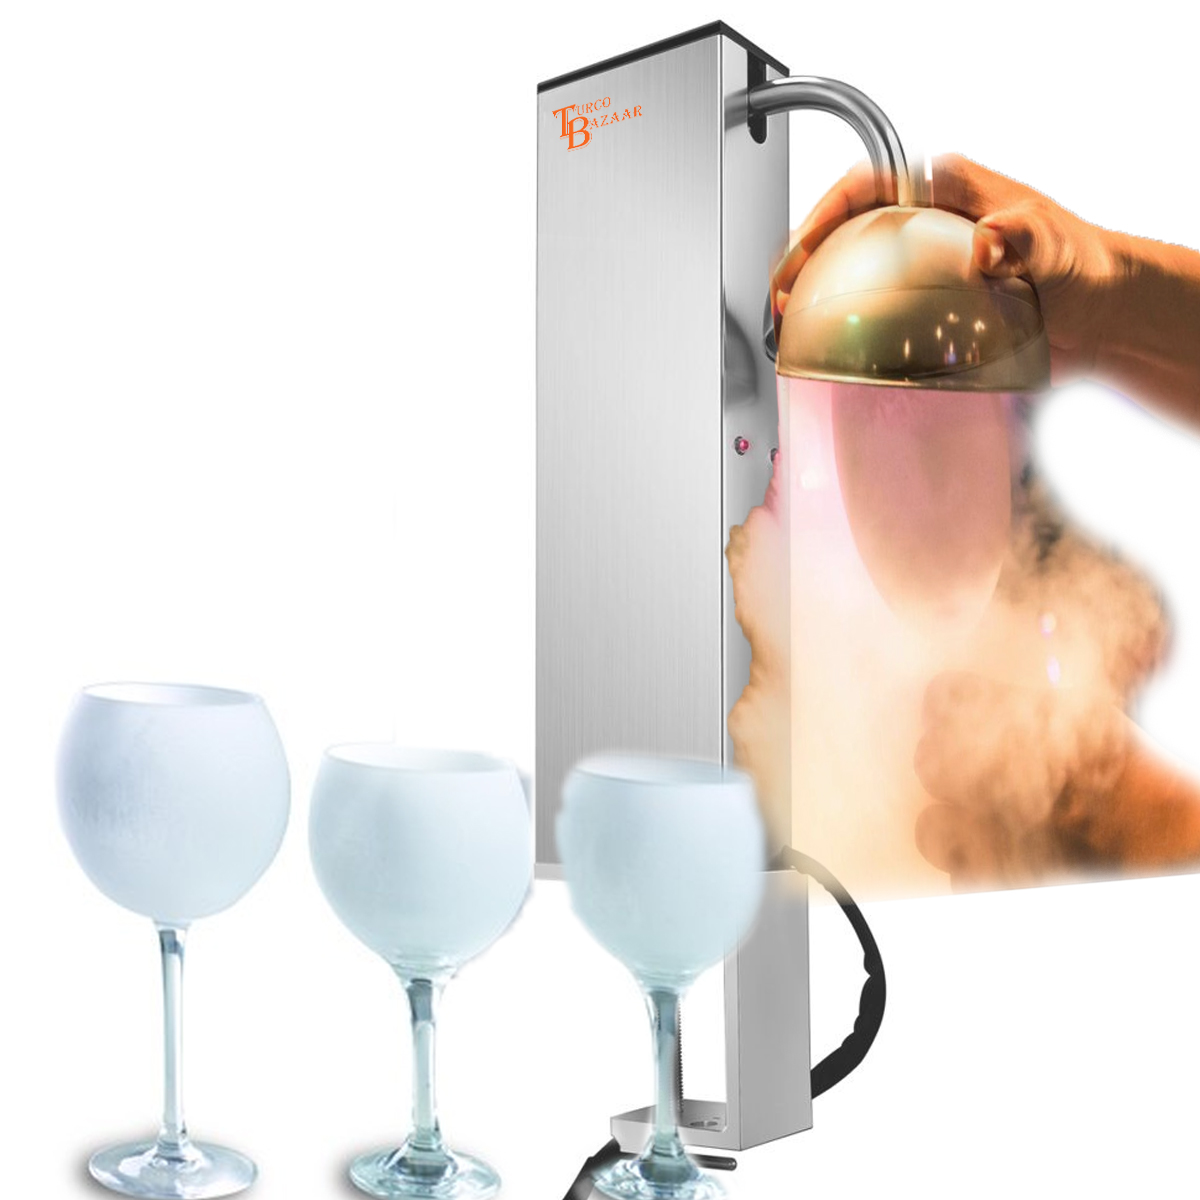 https://www.turcobazaar.com/image/cache/catalog/JUICE%20COOLER/glass-chiller-co2-glass-froster-for-cups-and-glasses-instant-drink-chiller-for-cocktail-854-1200x1200.jpg